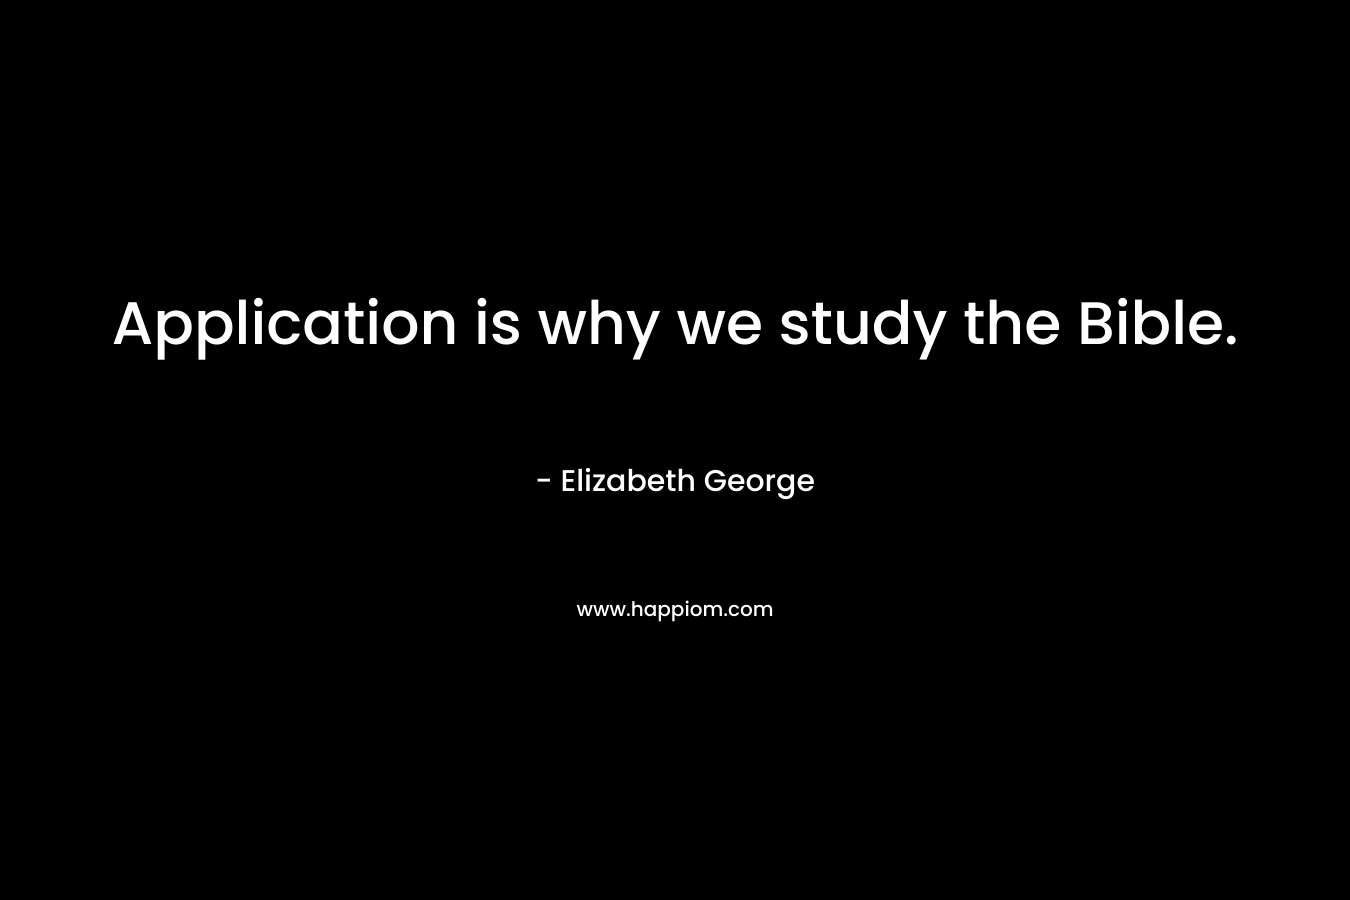 Application is why we study the Bible.